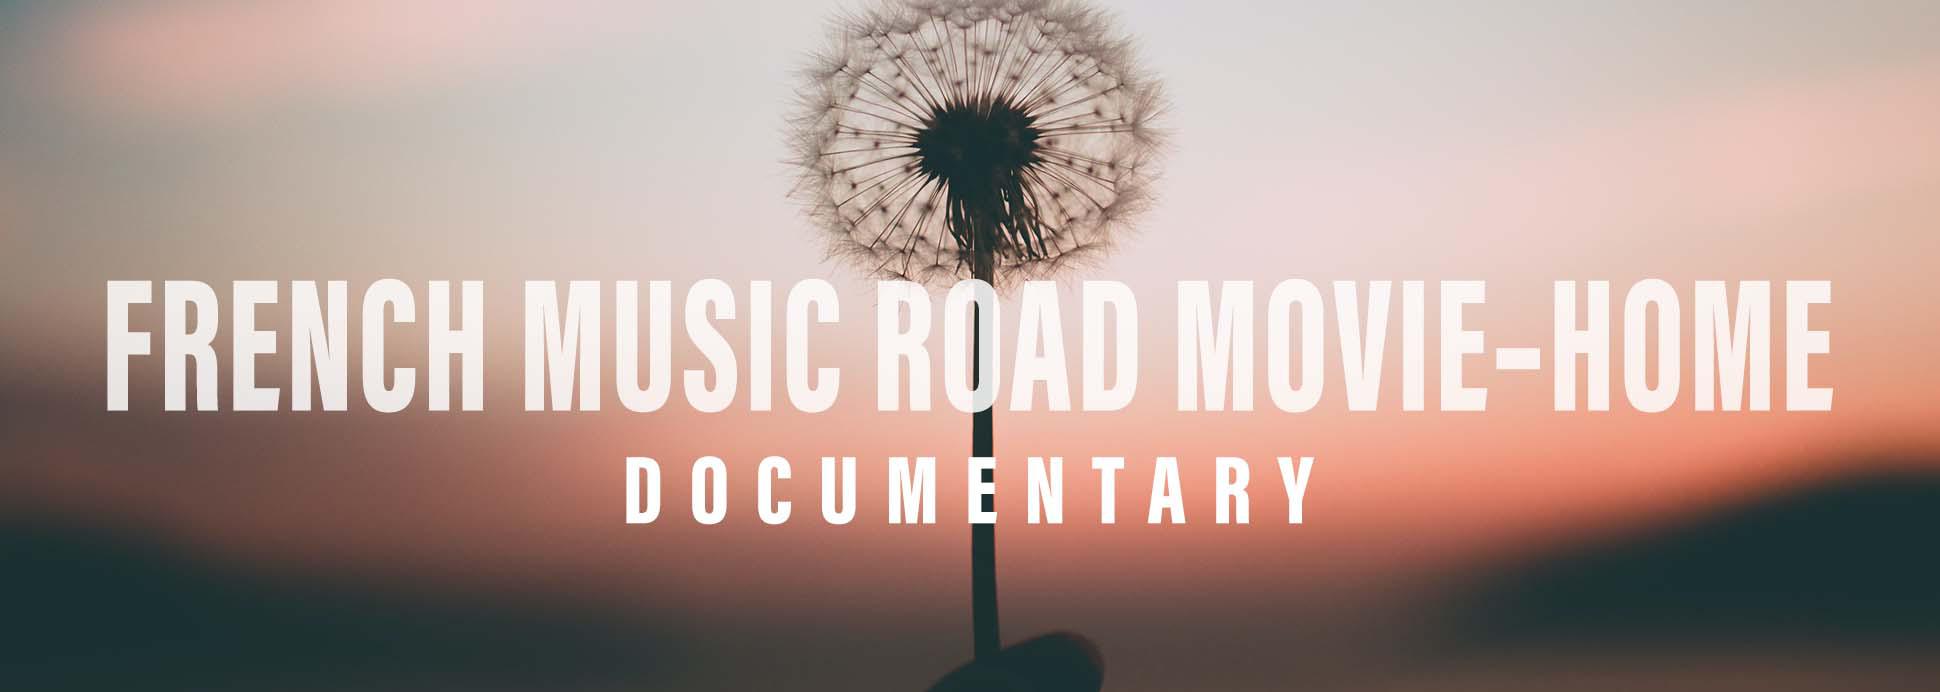 French Music Road Movie